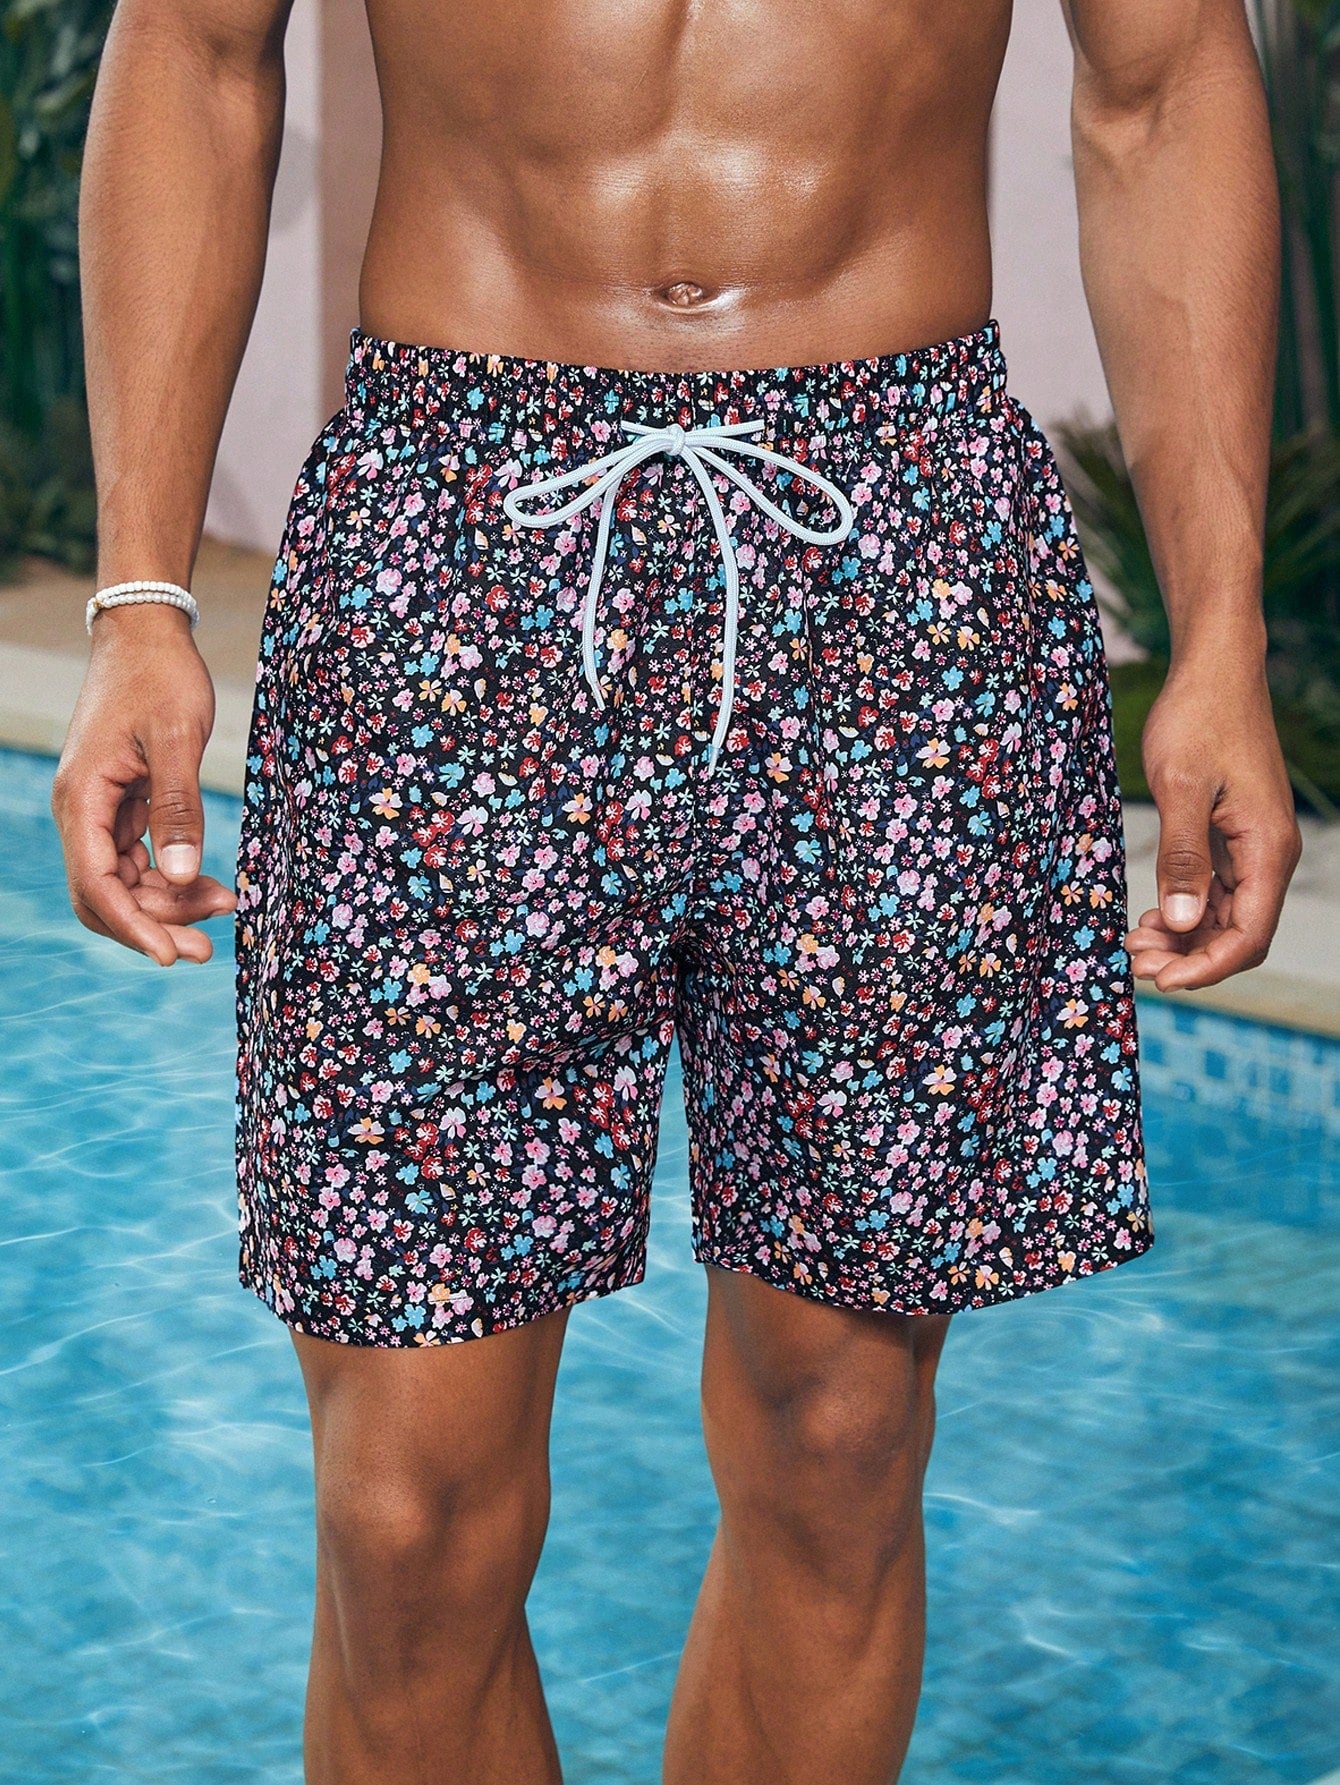 Boho Unisex Floral Beach Shorts with Drawstring Waist and Pockets - 100% Polyester